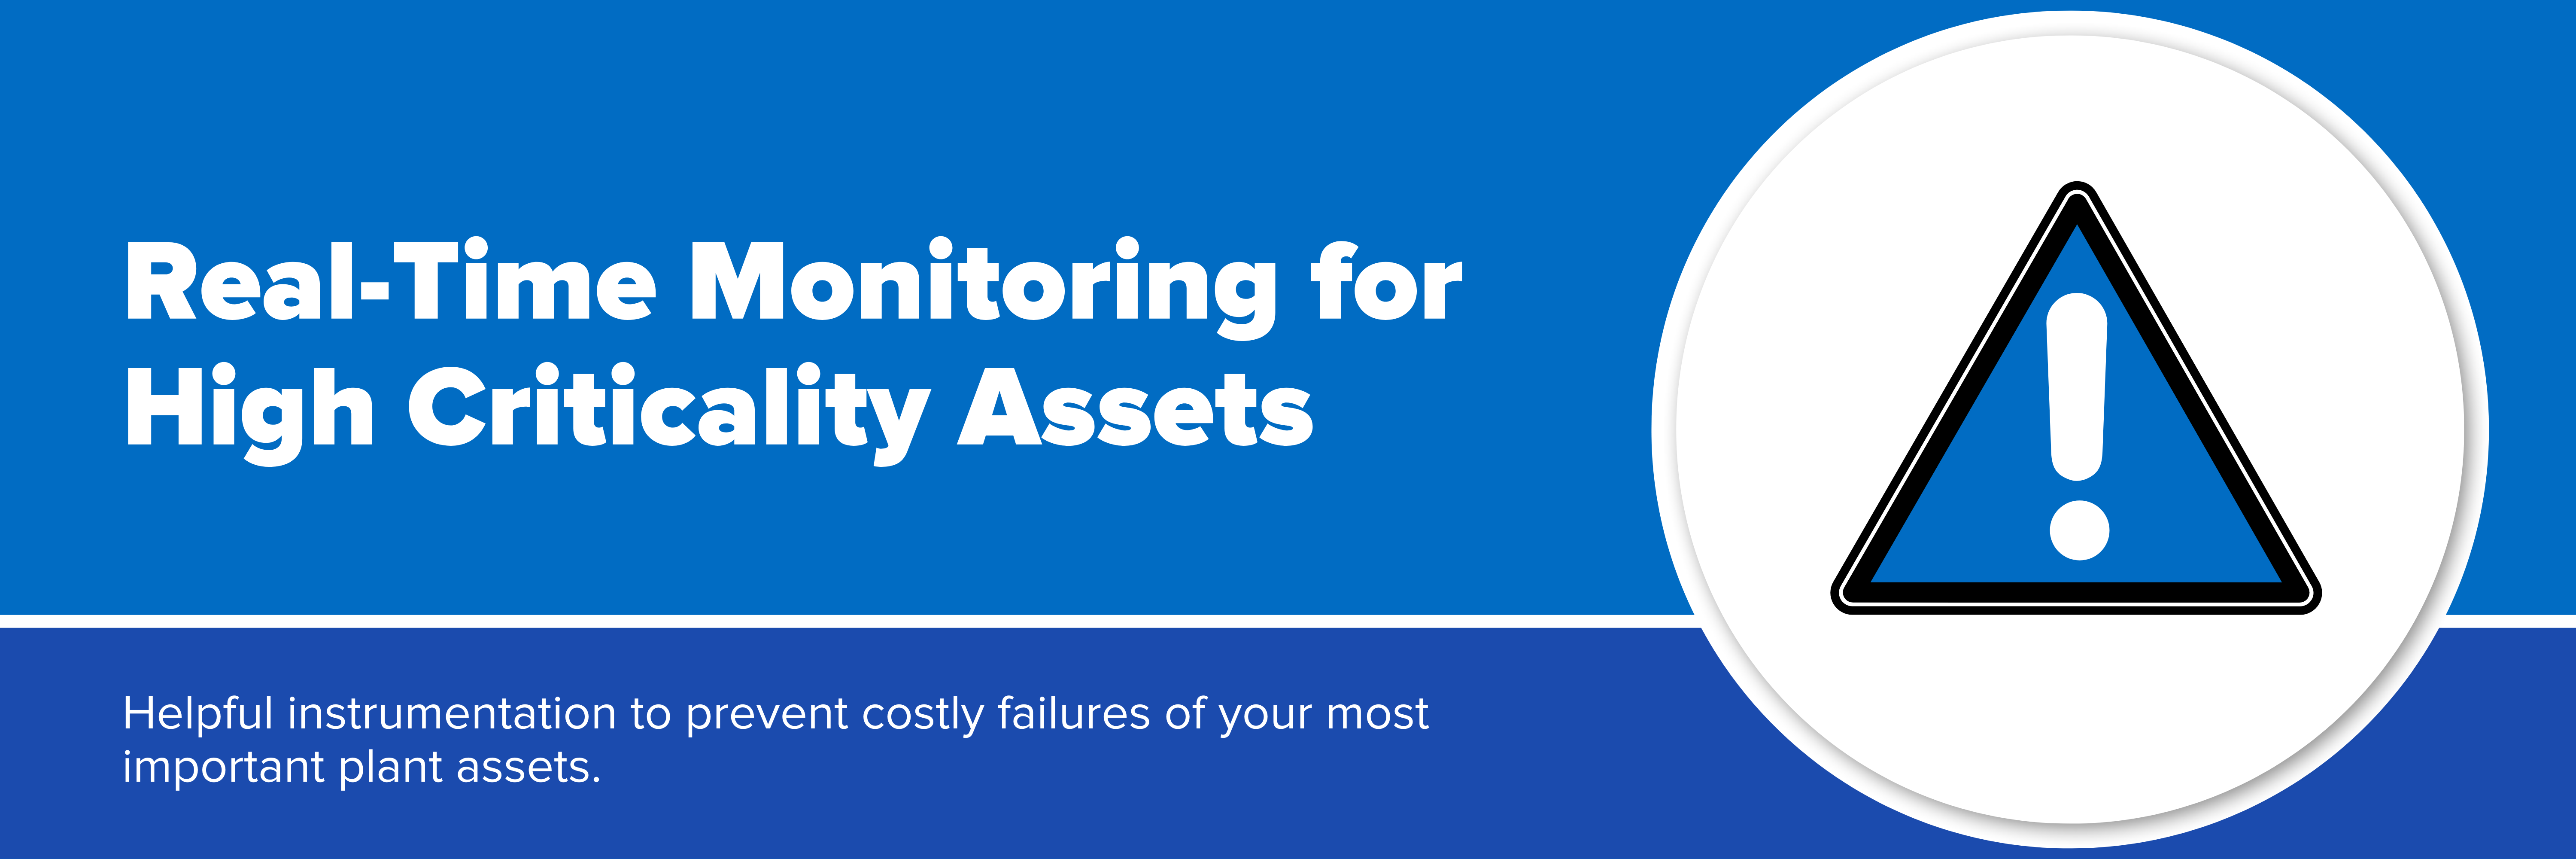 Header image with text "Real-Time Monitoring for High Criticality Assets"